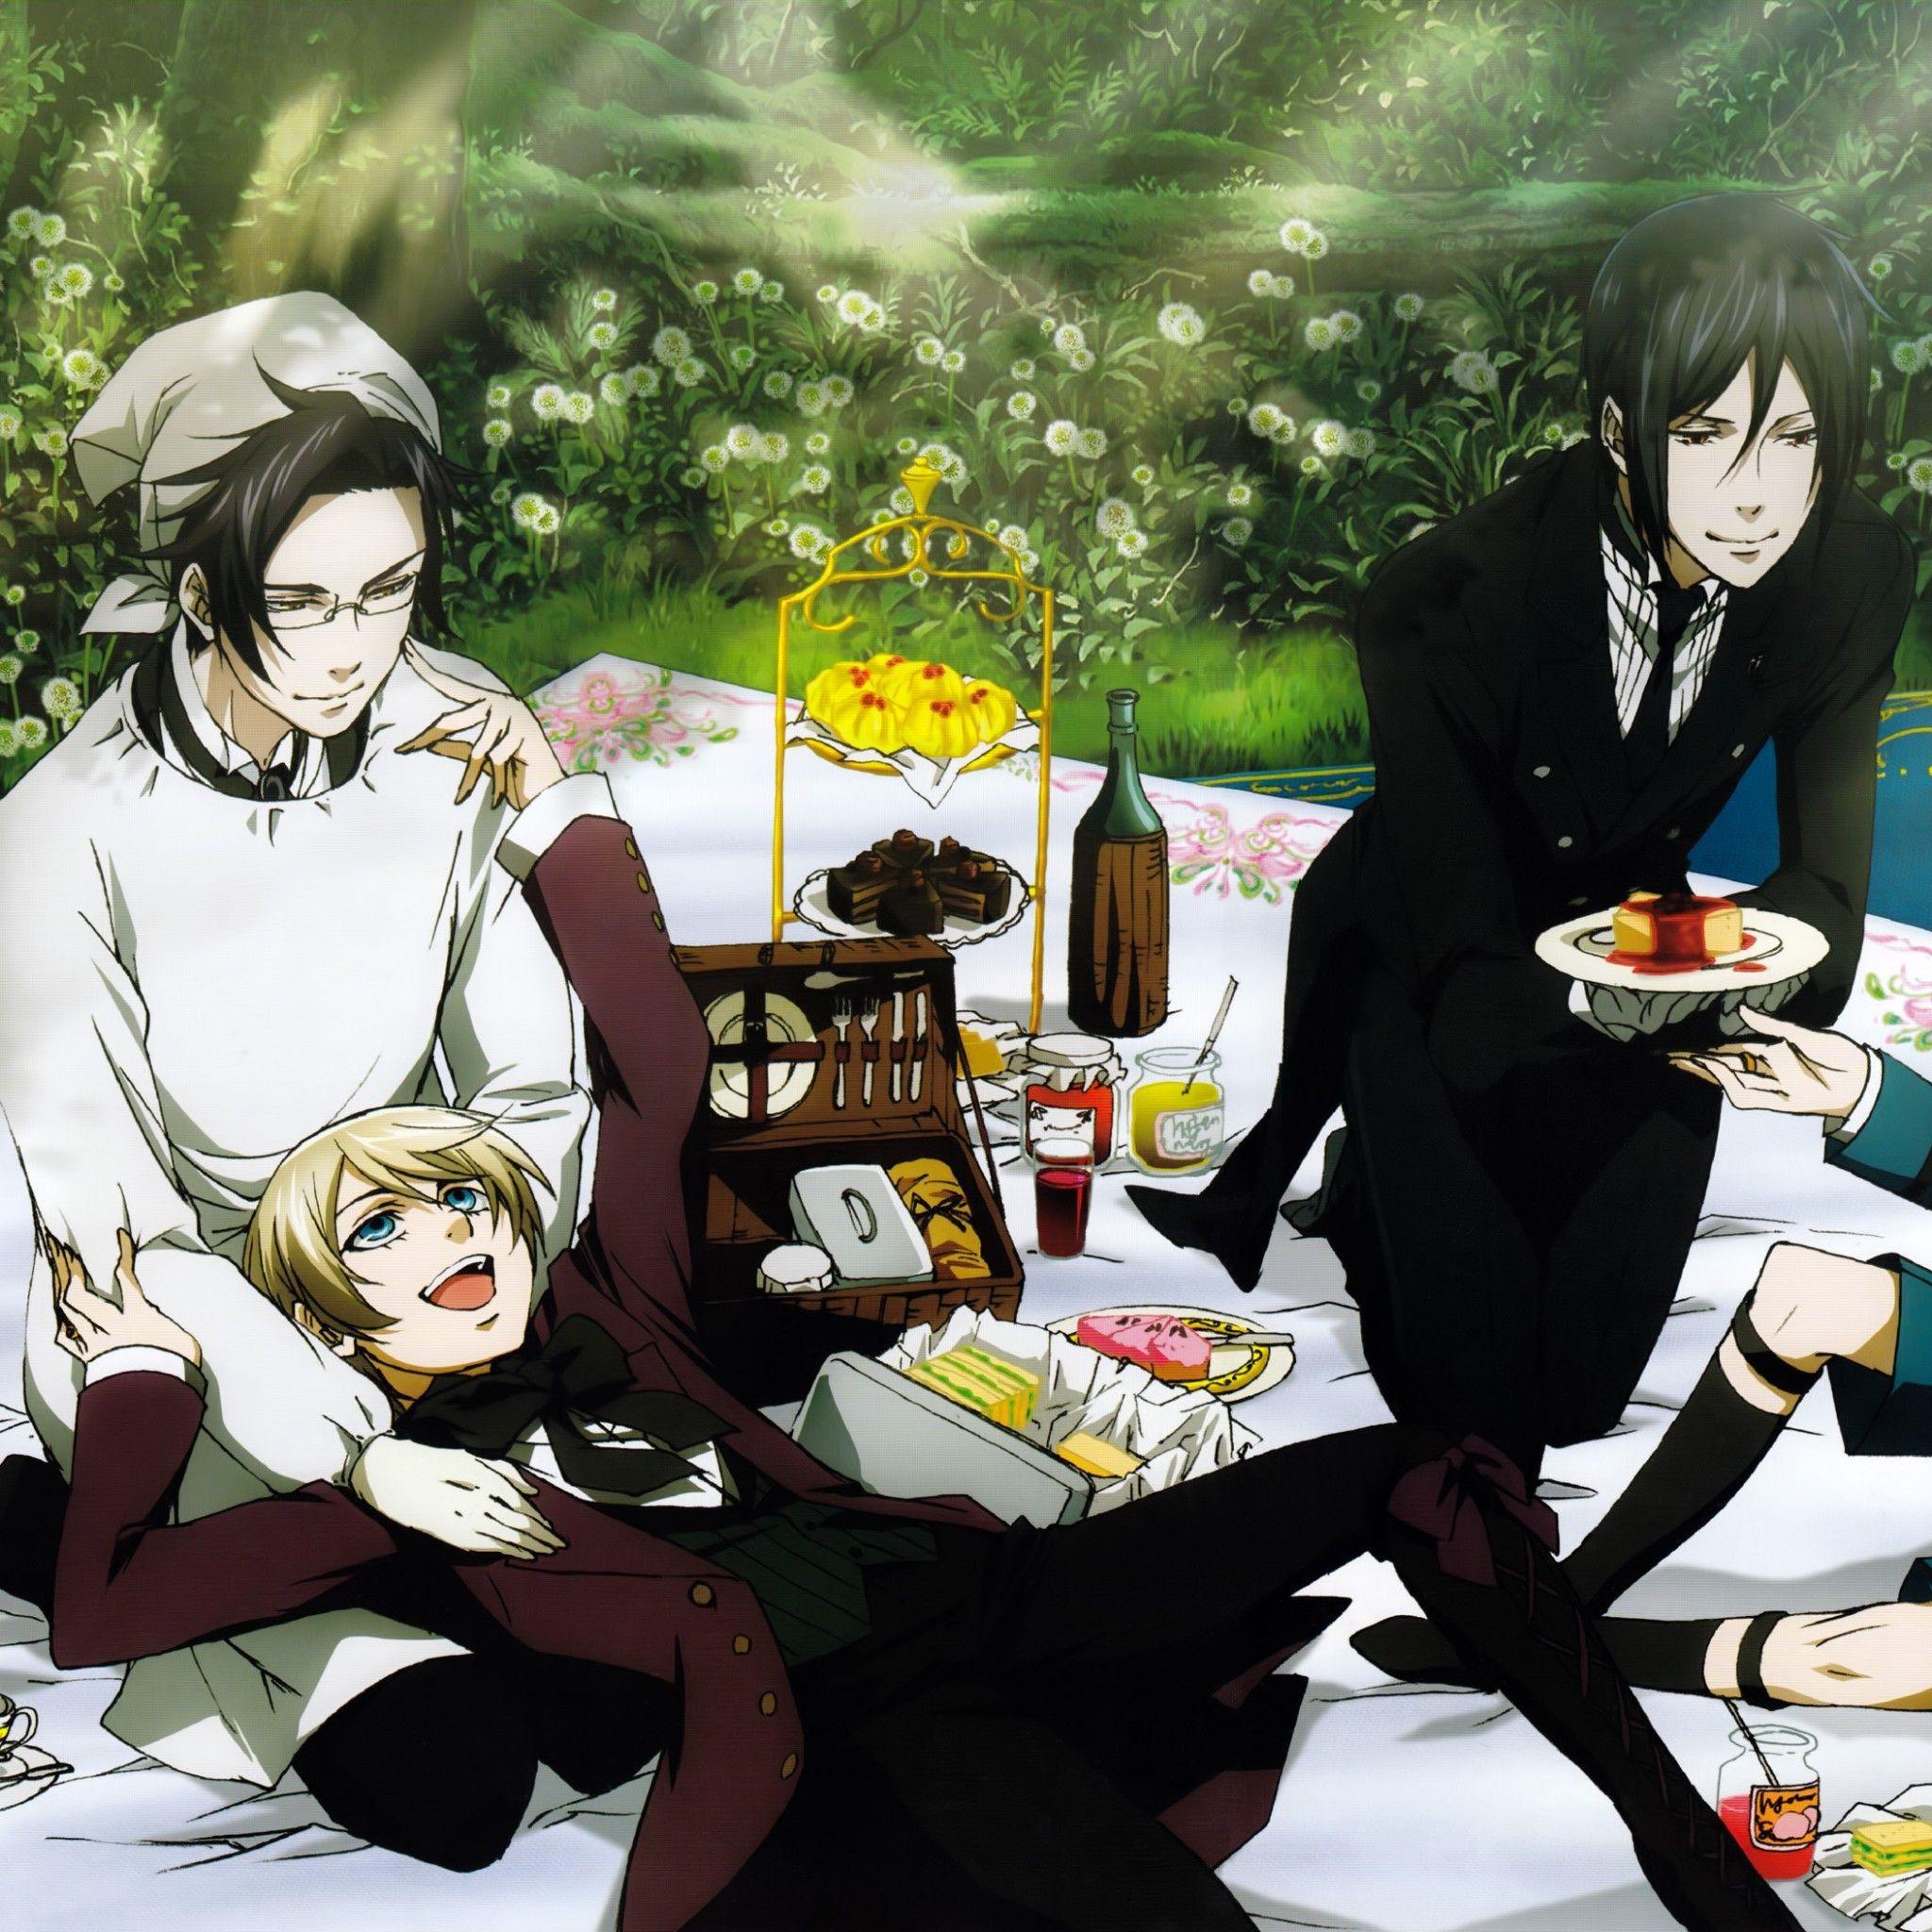 Alois Trancy and Ciel Phantomhive to see more Thanksgiving